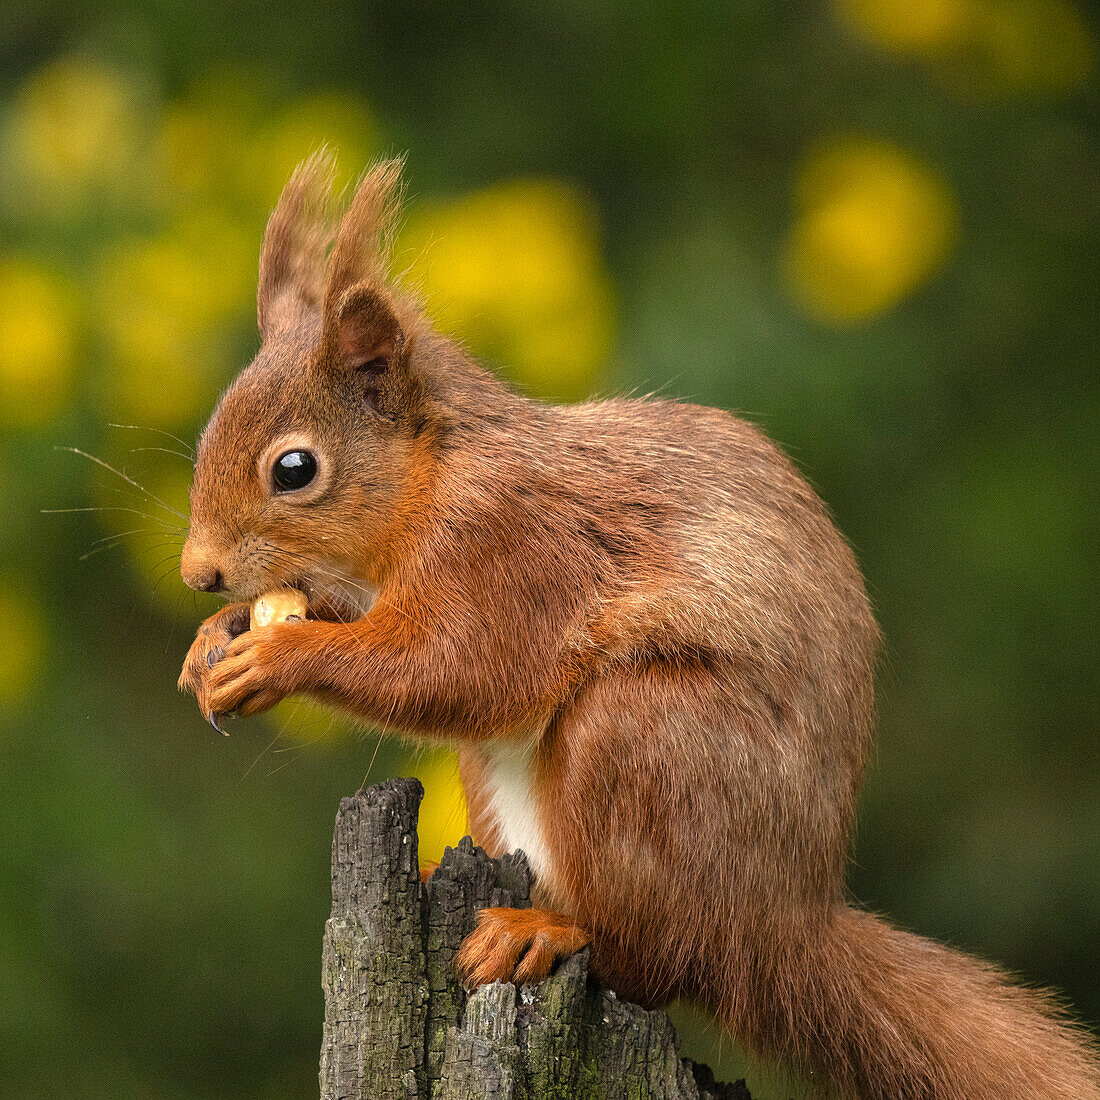 Red Squirrel, County Laois, Leinster, Republic of Ireland, Europe